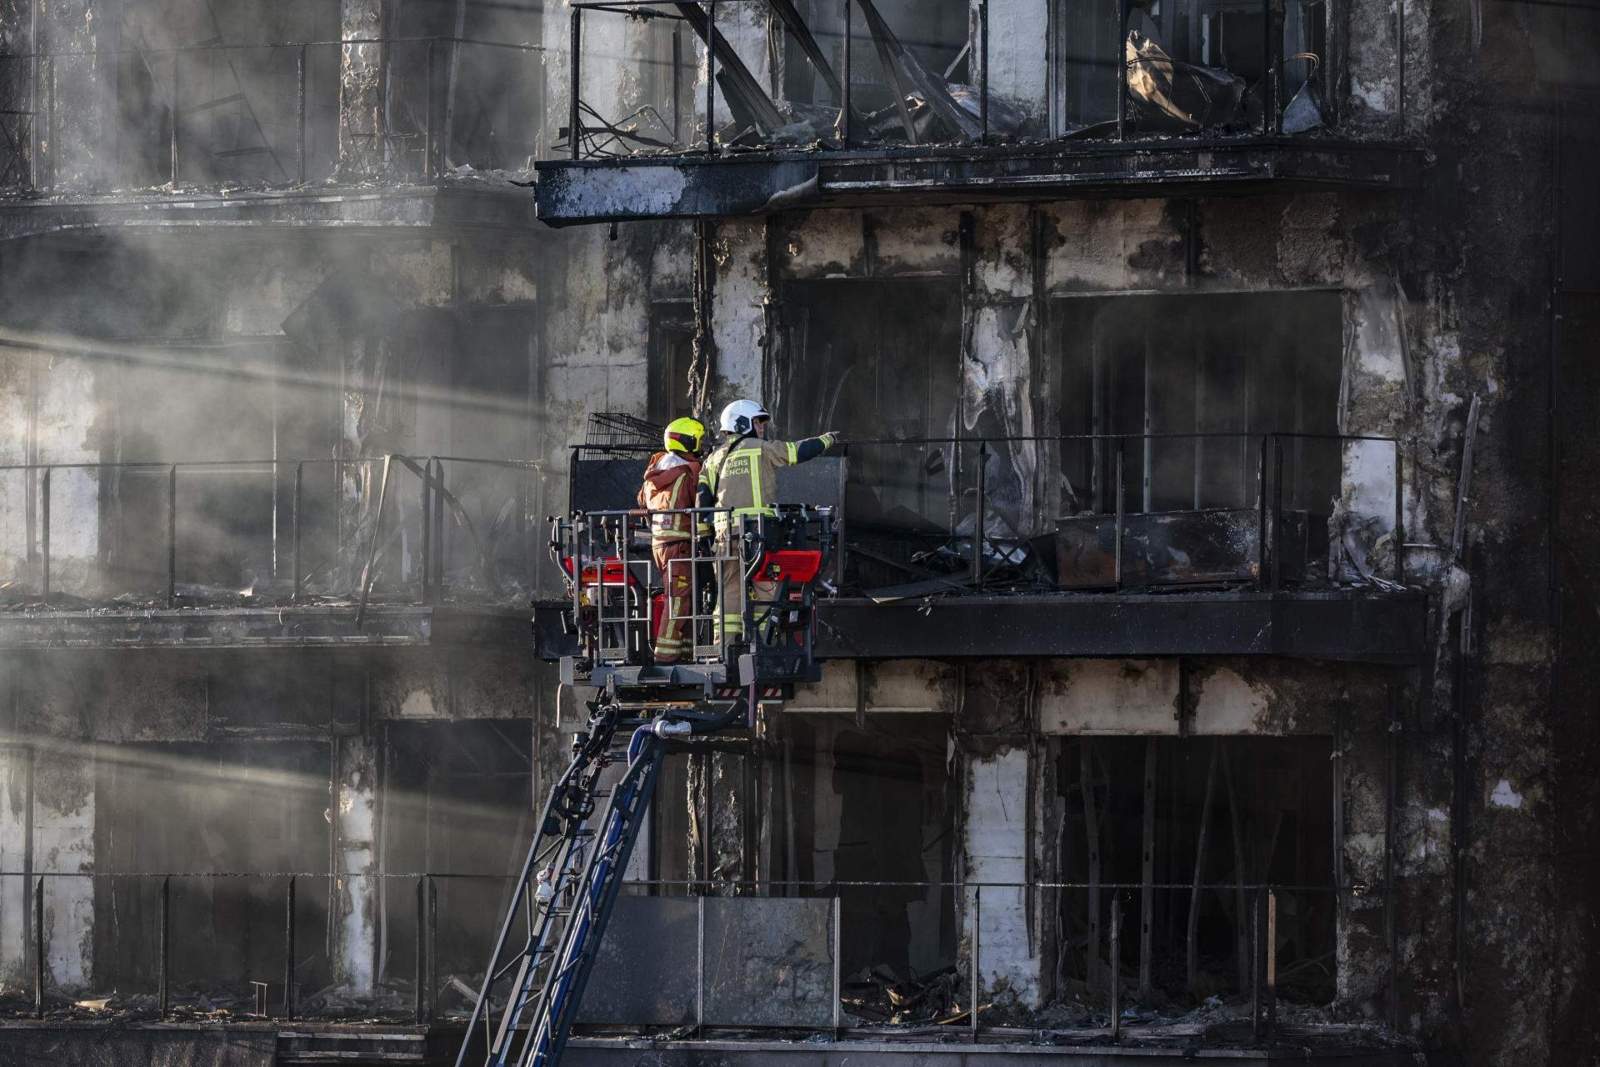 Short-circuit in an awning: leading hypothesis on cause of the disastrous València tower fire